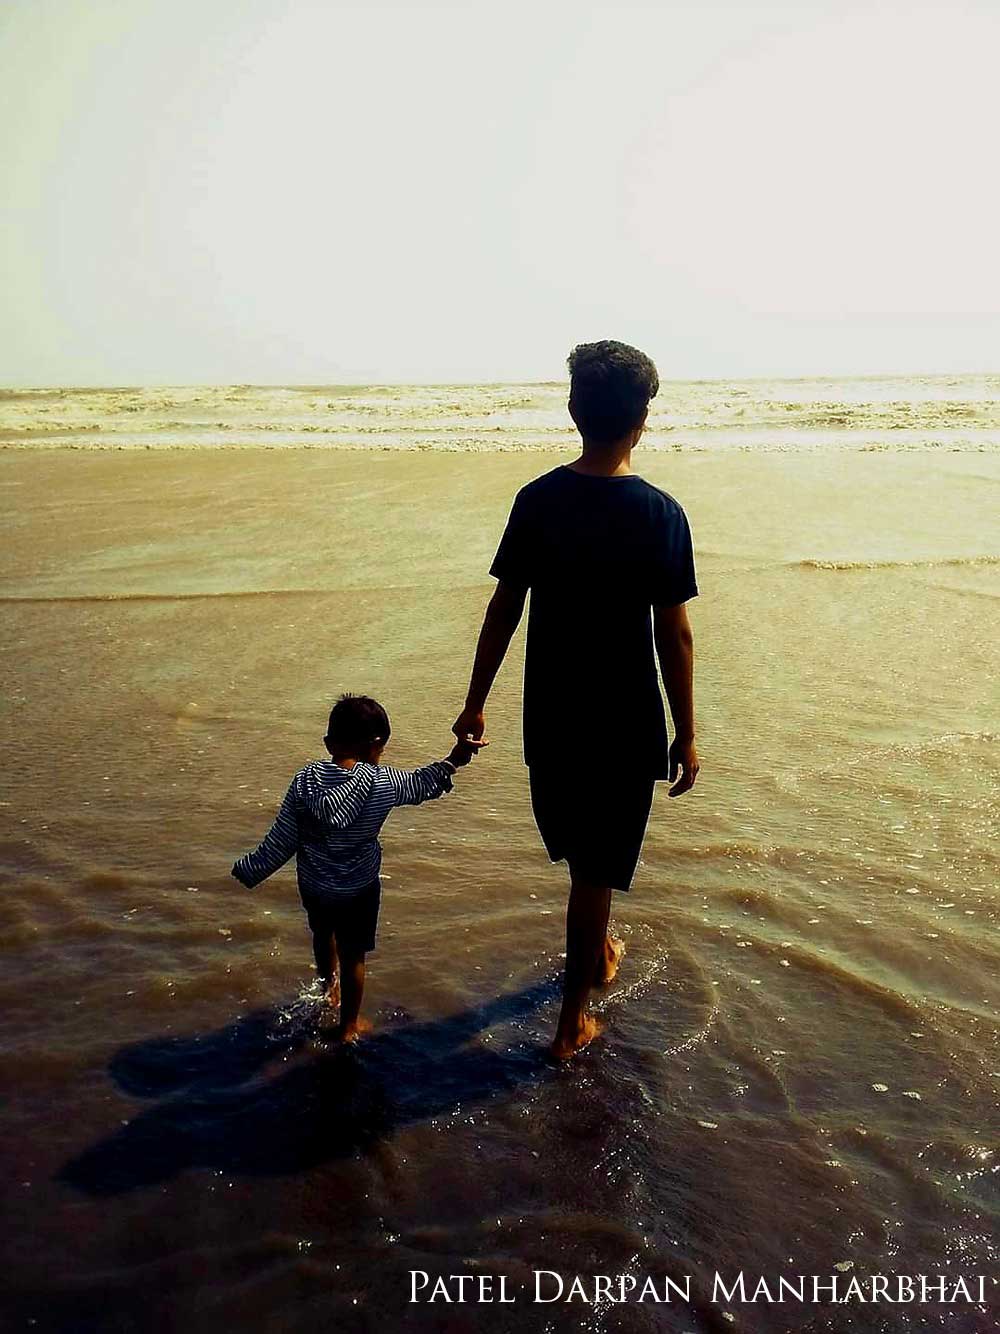 A man and a small boy hold hands while walking on the beach.